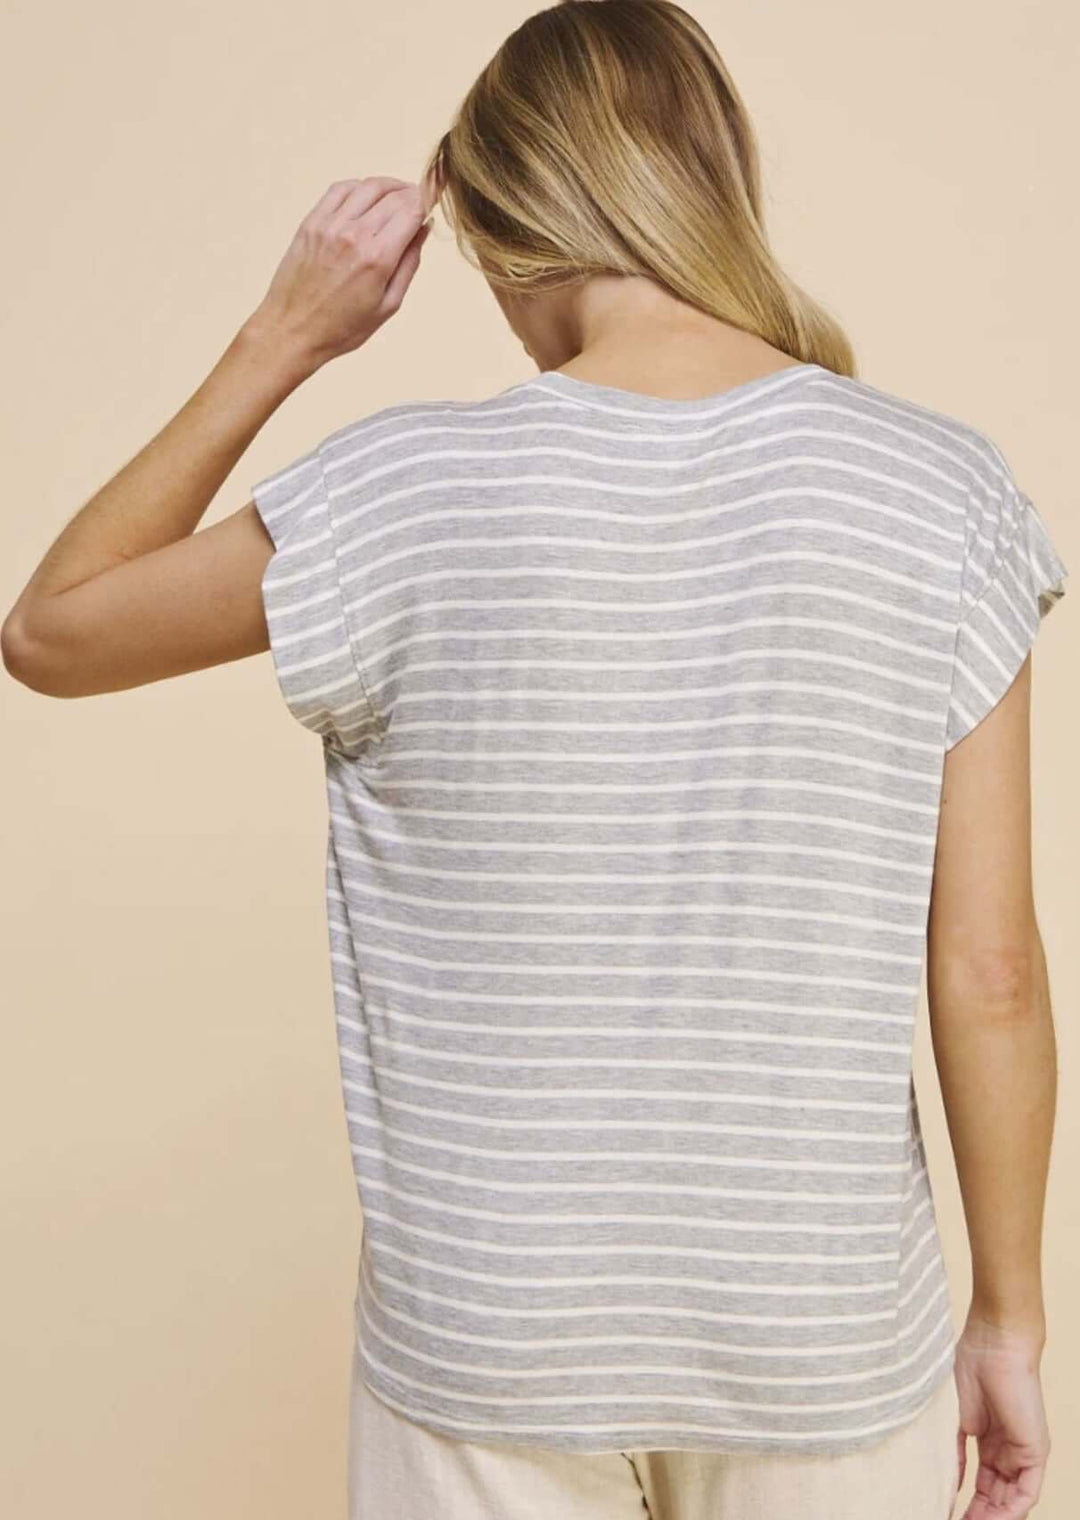 USA Made Women's Super Soft Striped V-Neck Relaxed Fit Tee in Grey & White Stripes   | Classy Cozy Cool Made in America Clothing Boutique